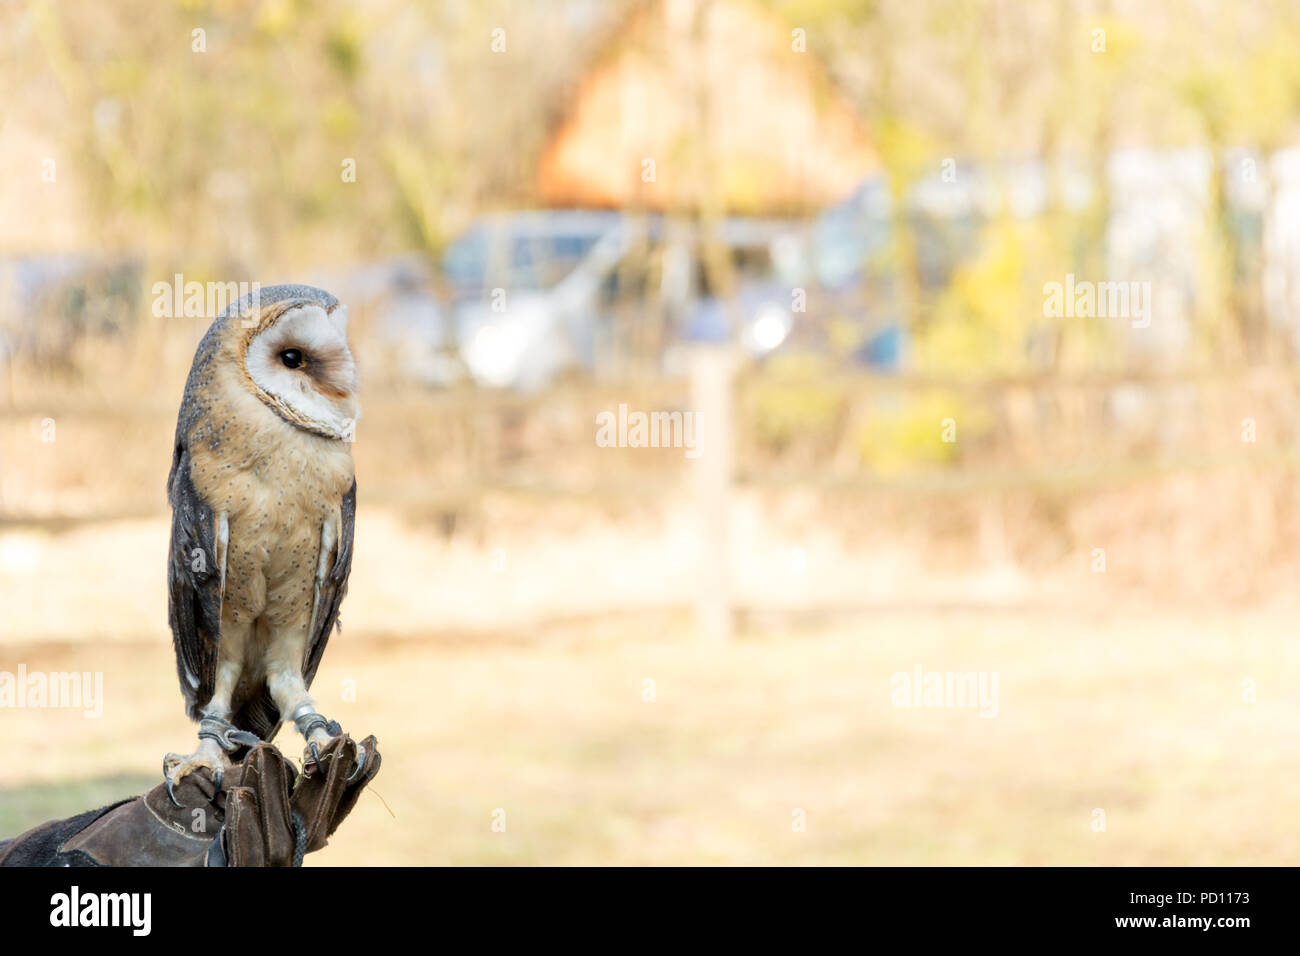 Magnificent owl bird sits on the hand Stock Photo